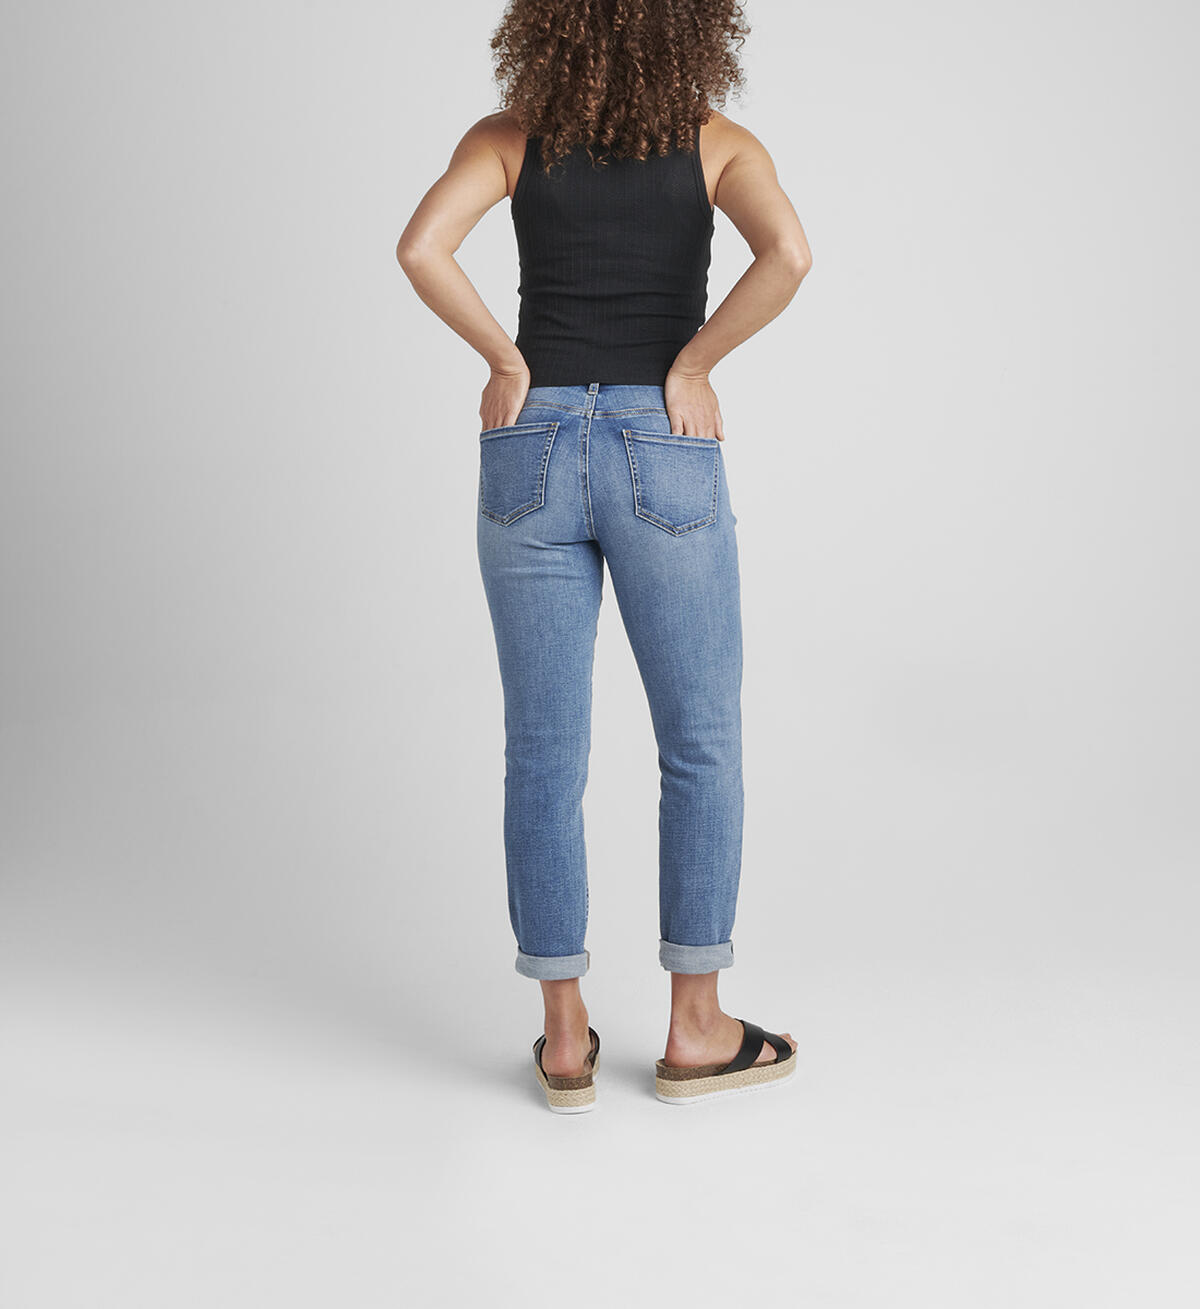 Carter Mid Rise Girlfriend Jeans Petite, , hi-res image number 1